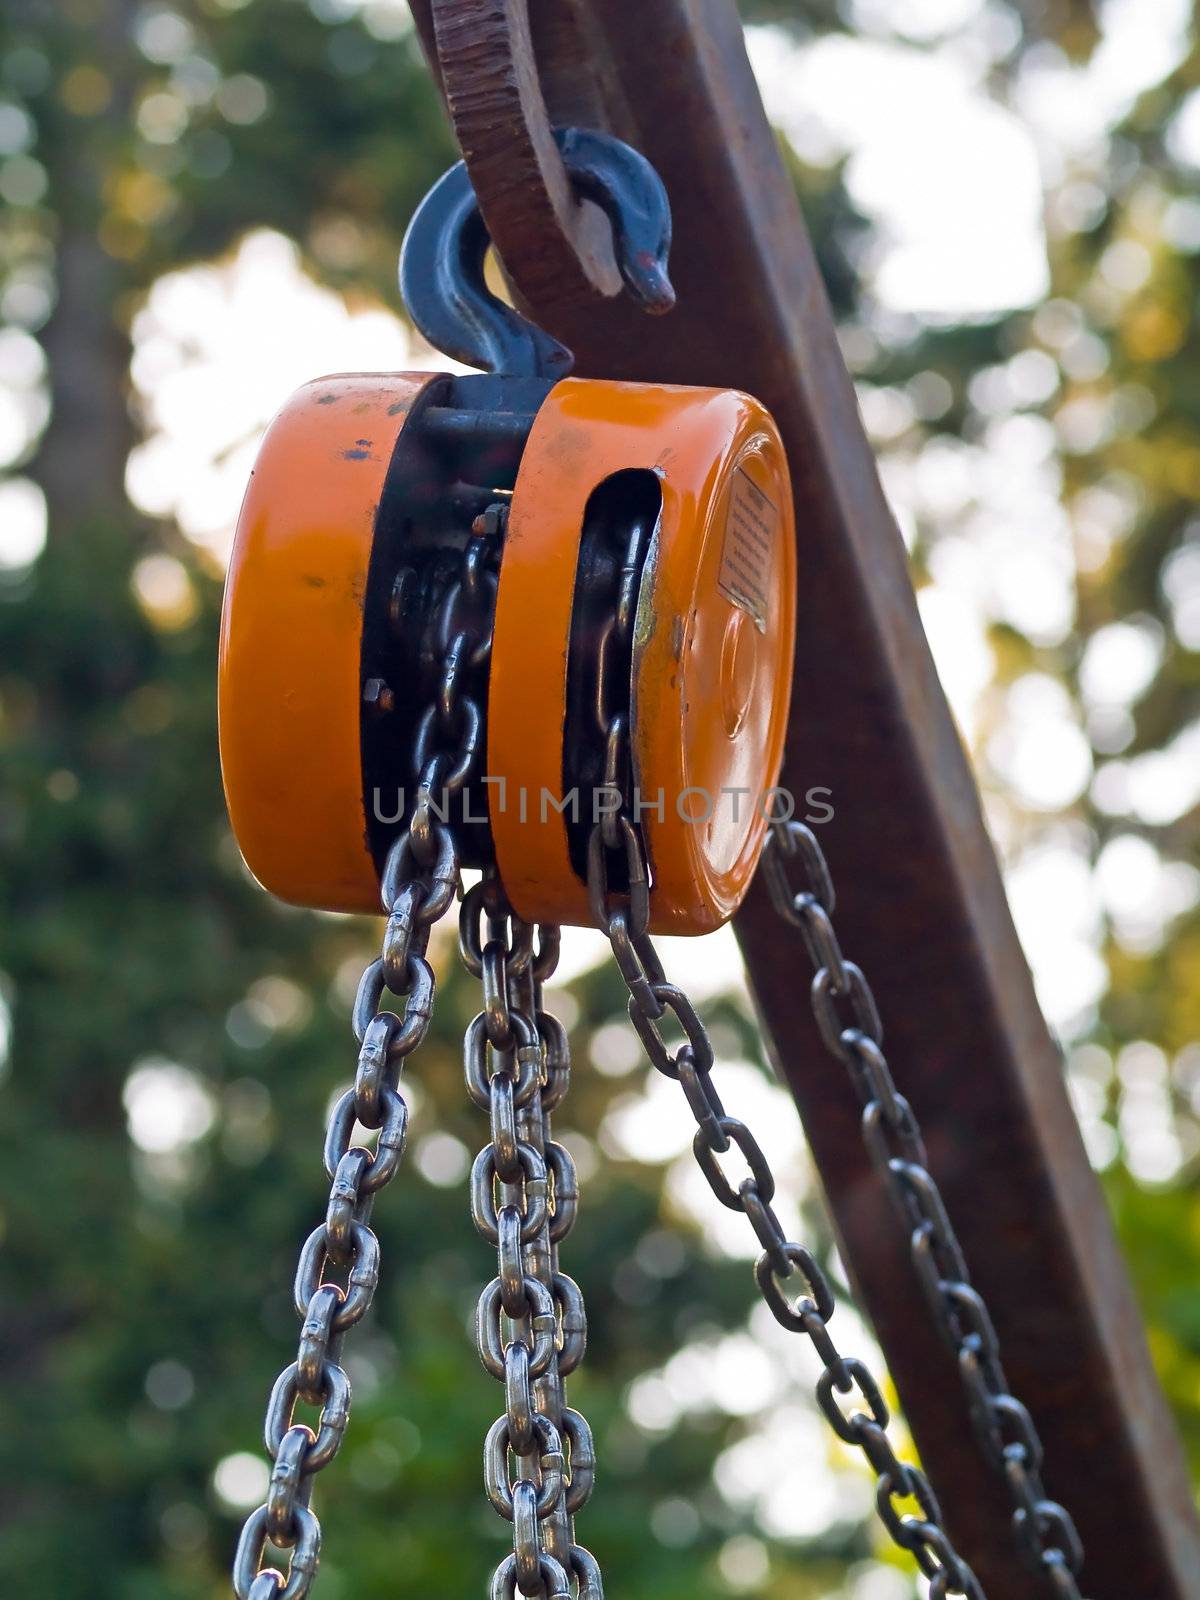 Large metal hook and chains attached to a pulley